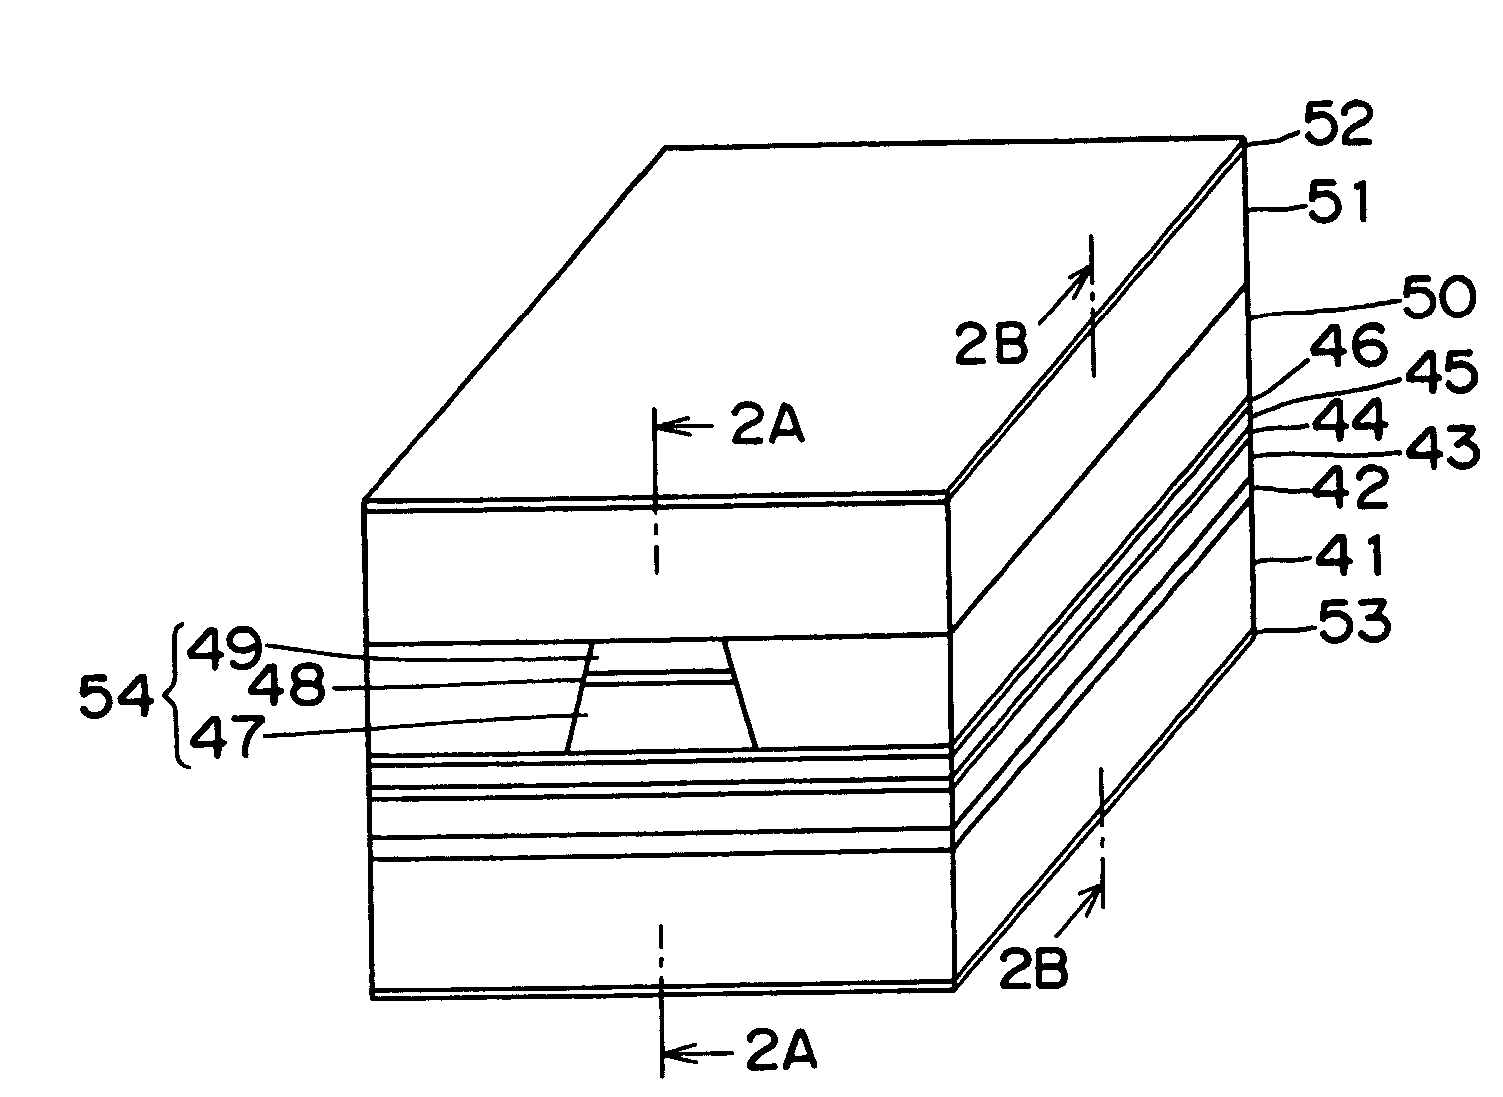 Semiconductor laser device and method of producing the same